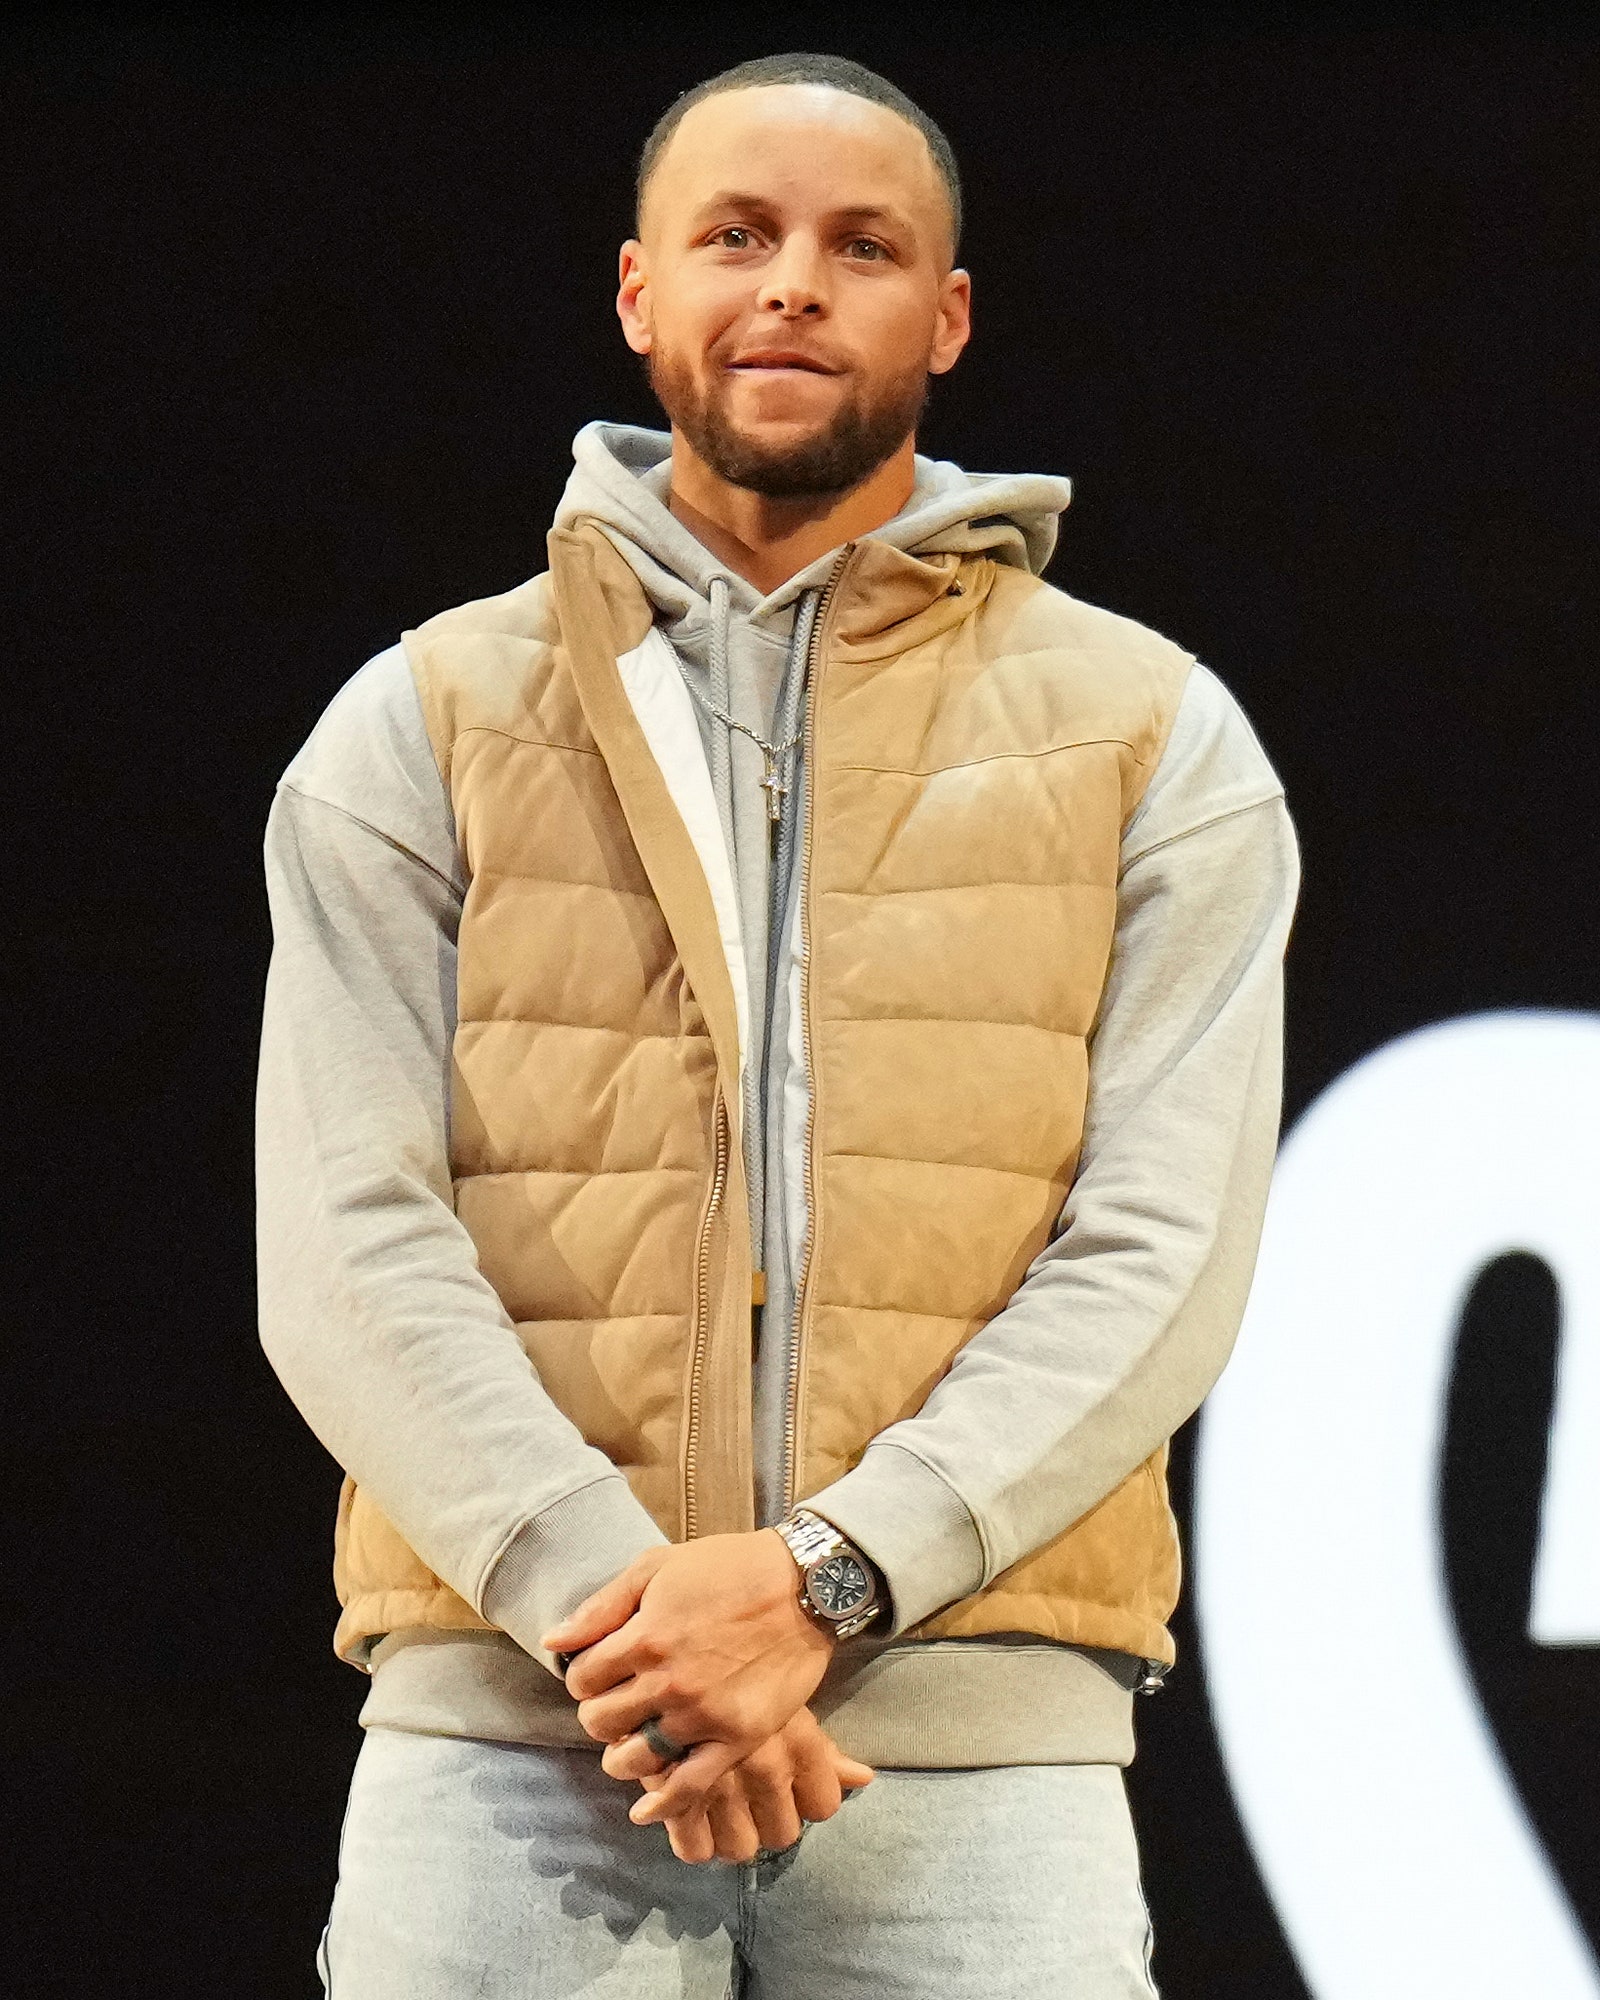 Basketball player Stephen Curry with Patek Philippe Nautilus watch